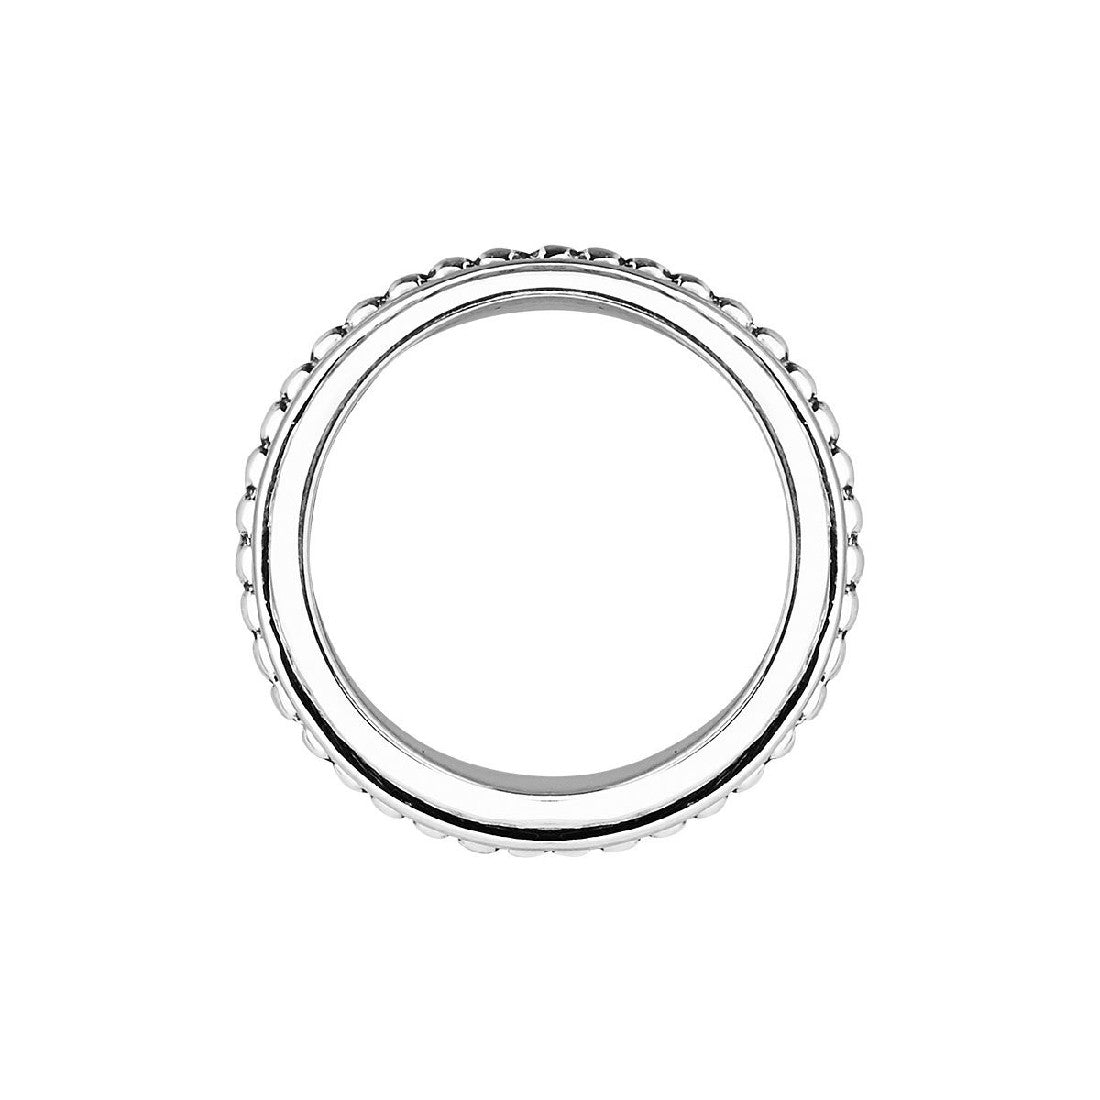 NAJO SILVER 15MM WIDE RING 3 SPINNING BANDS LARGE